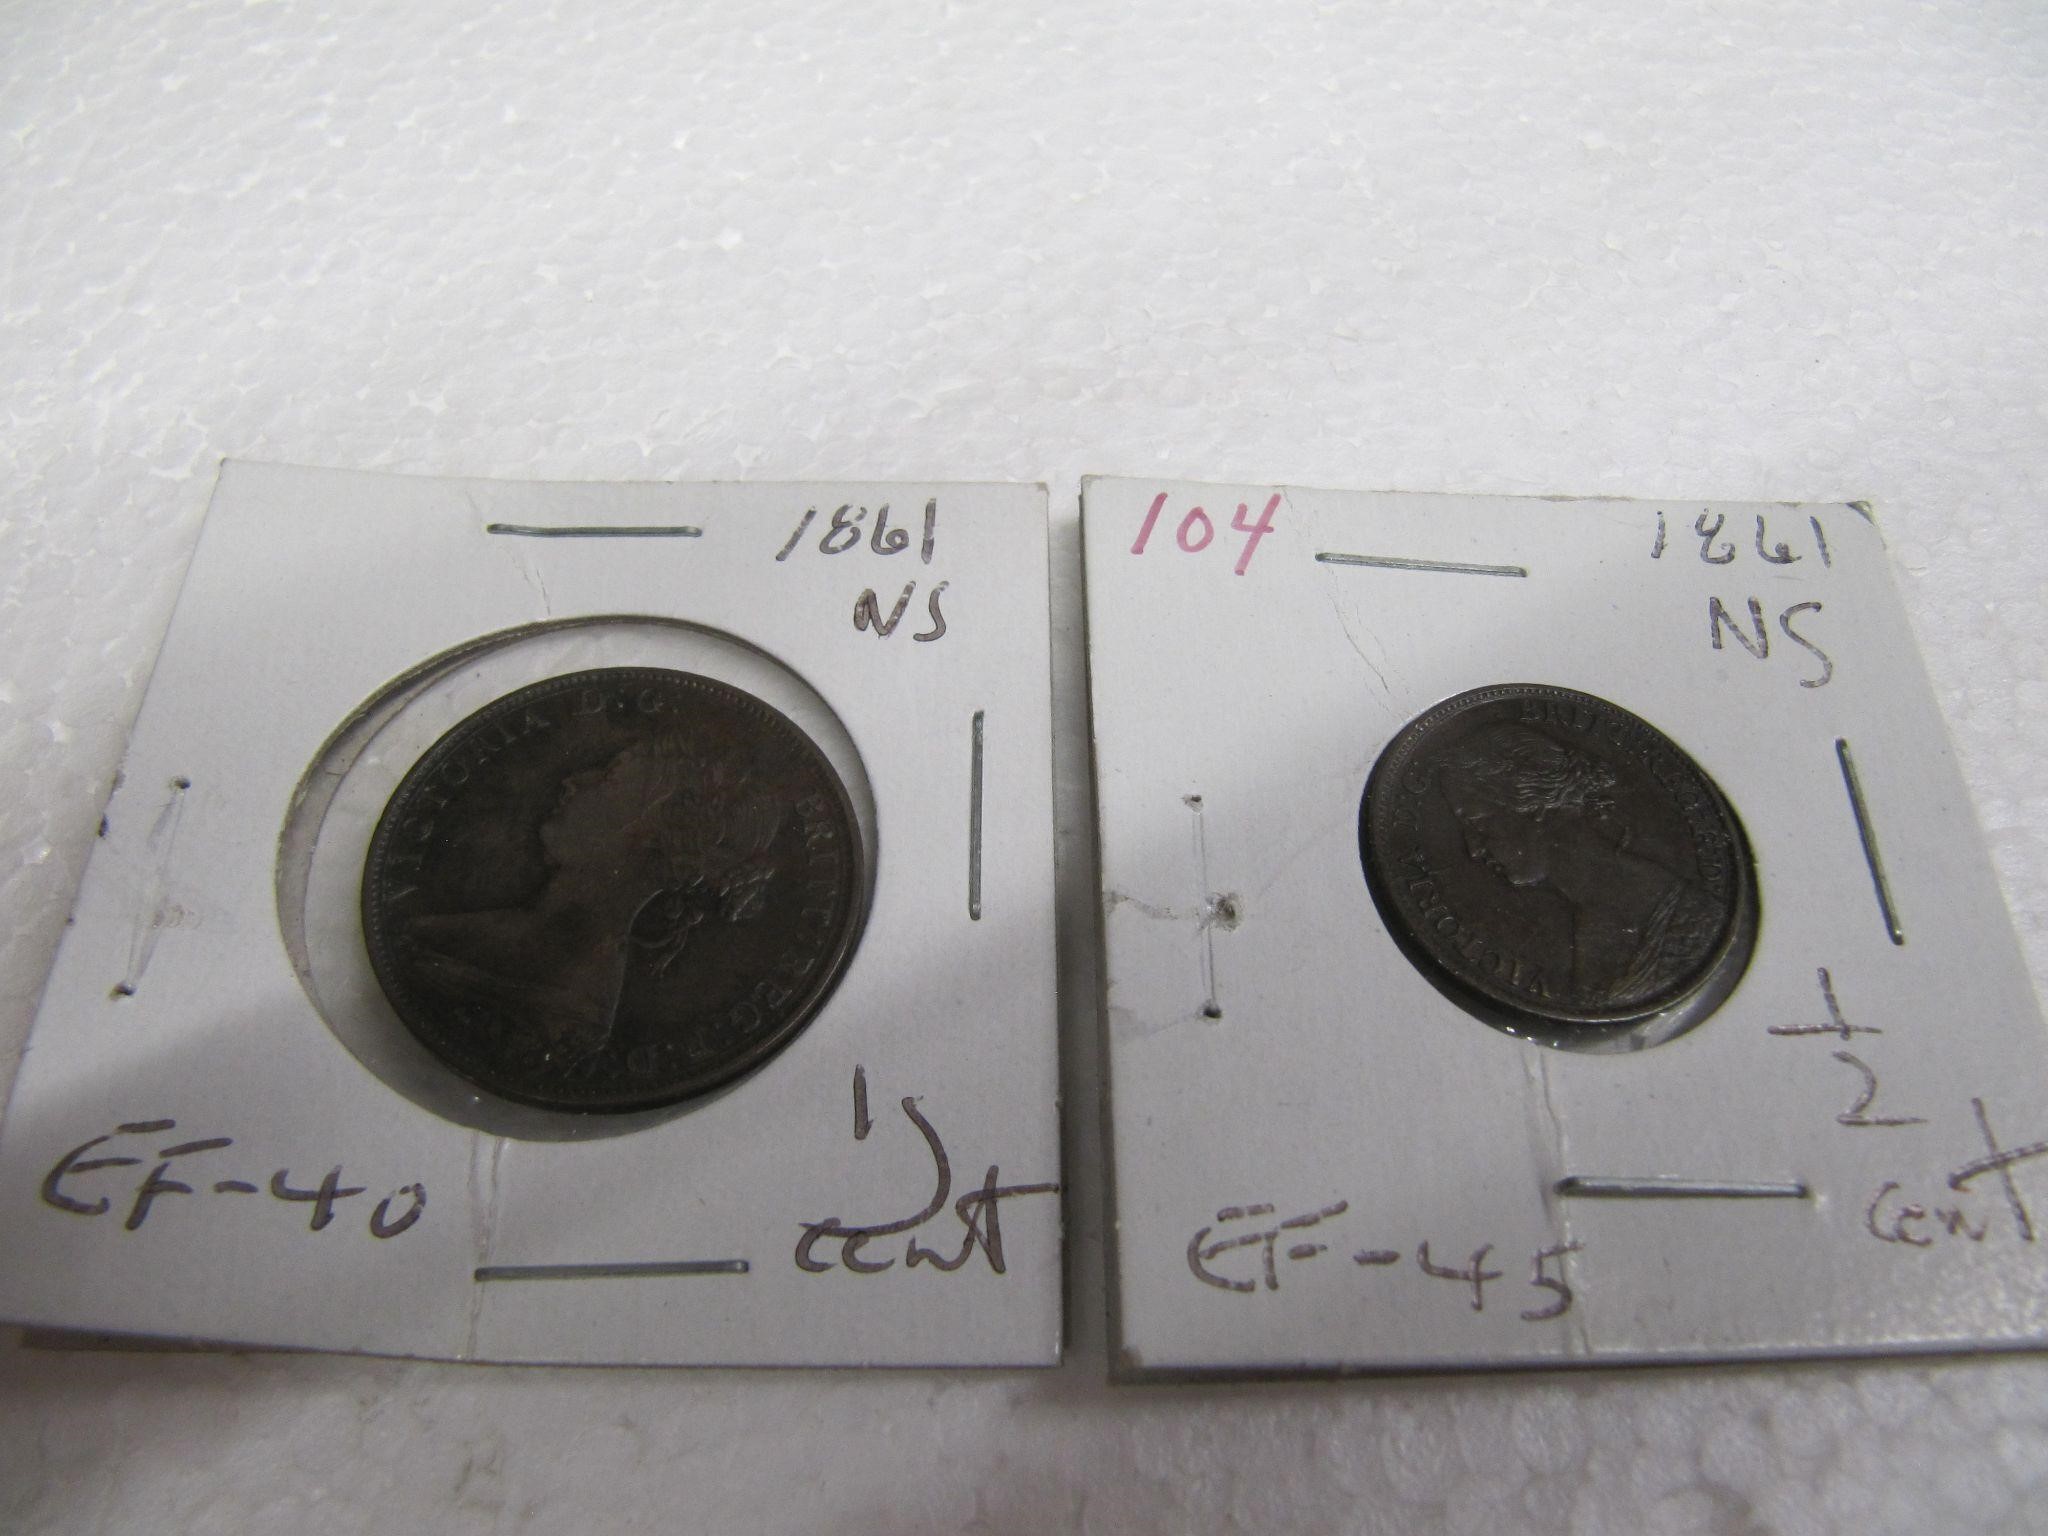 1861 ONE CENT & 1861 1/2 CENT NS